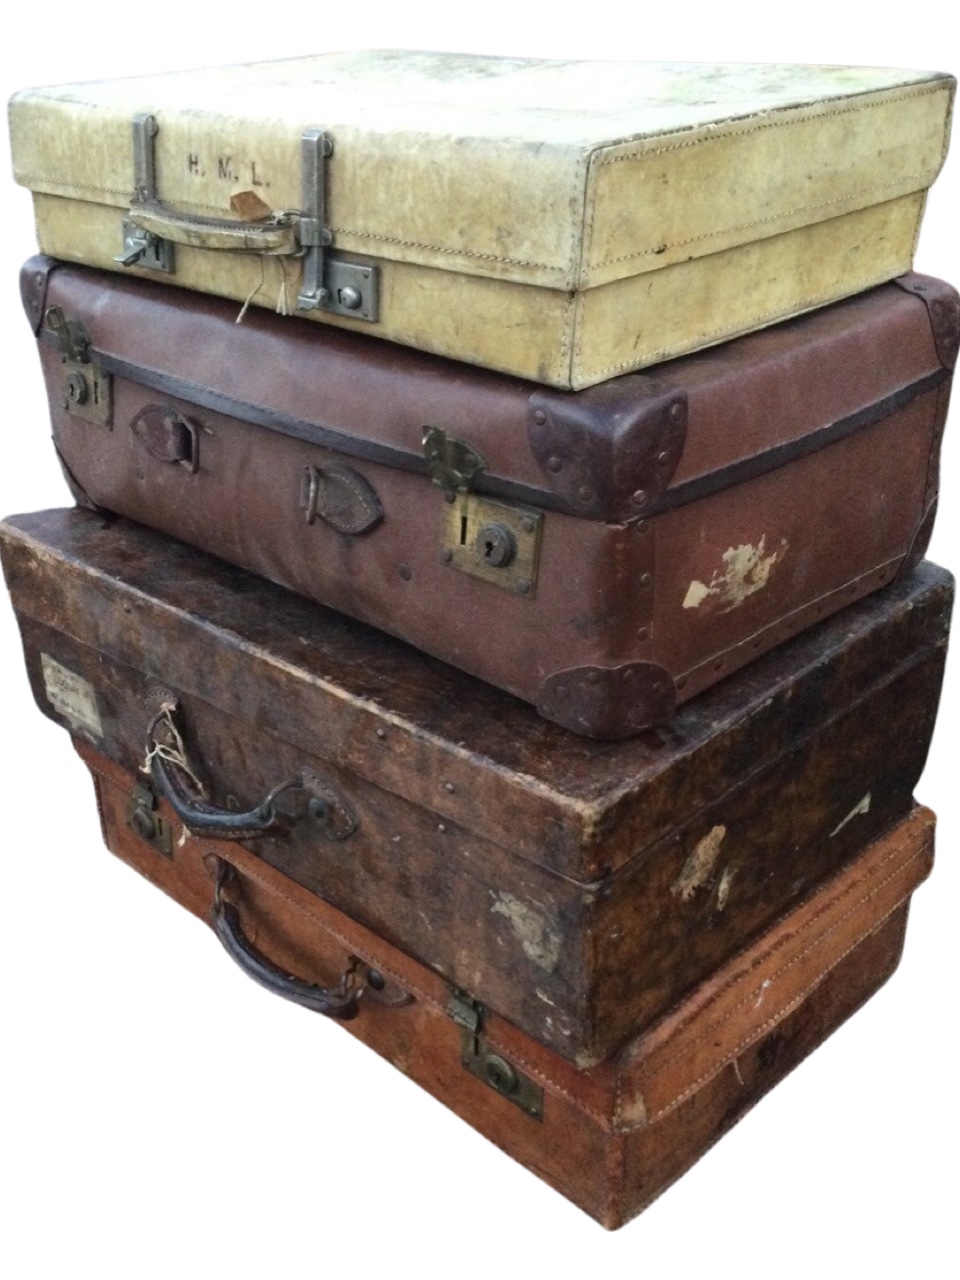 Four miscellaneous C20th suitcases - vellum by Revelation, fibreboard, leather with brass mounts and